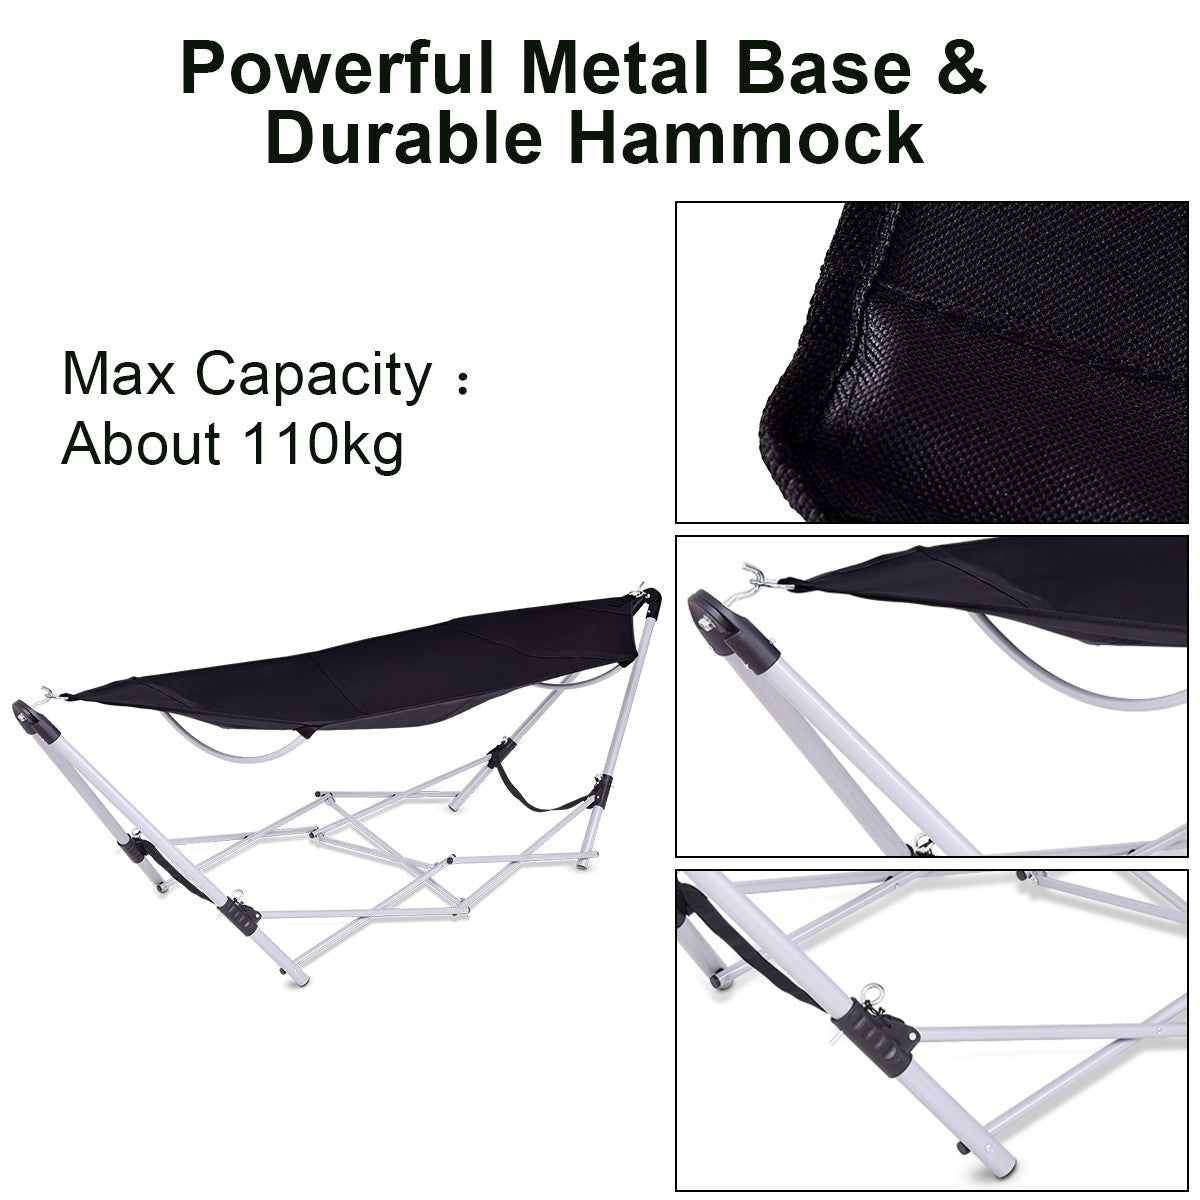 Portable Folding Hammock Lounge Camping Bed Steel Frame Stand W/Carry Bag